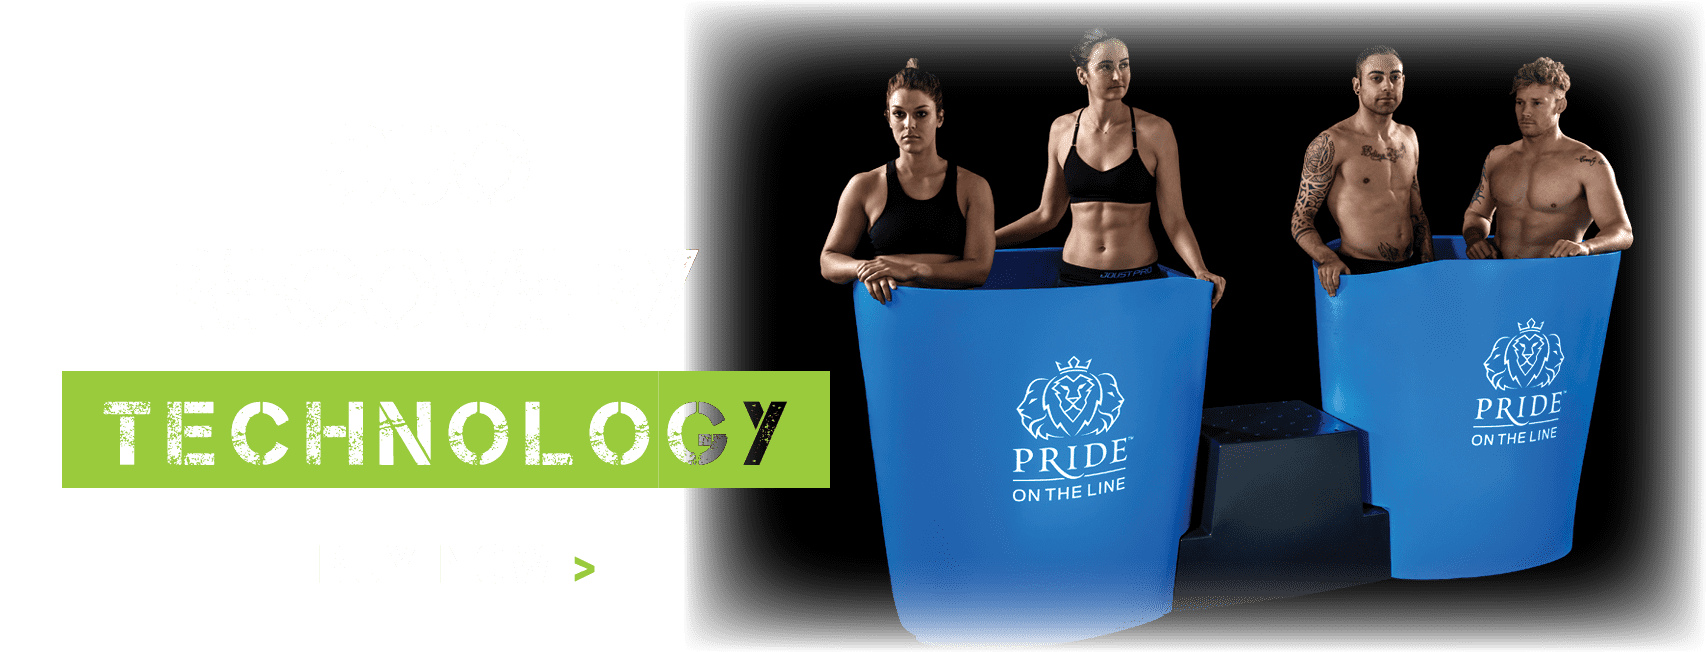 Pride on the Line Ice Baths - Recovery Technology Duo